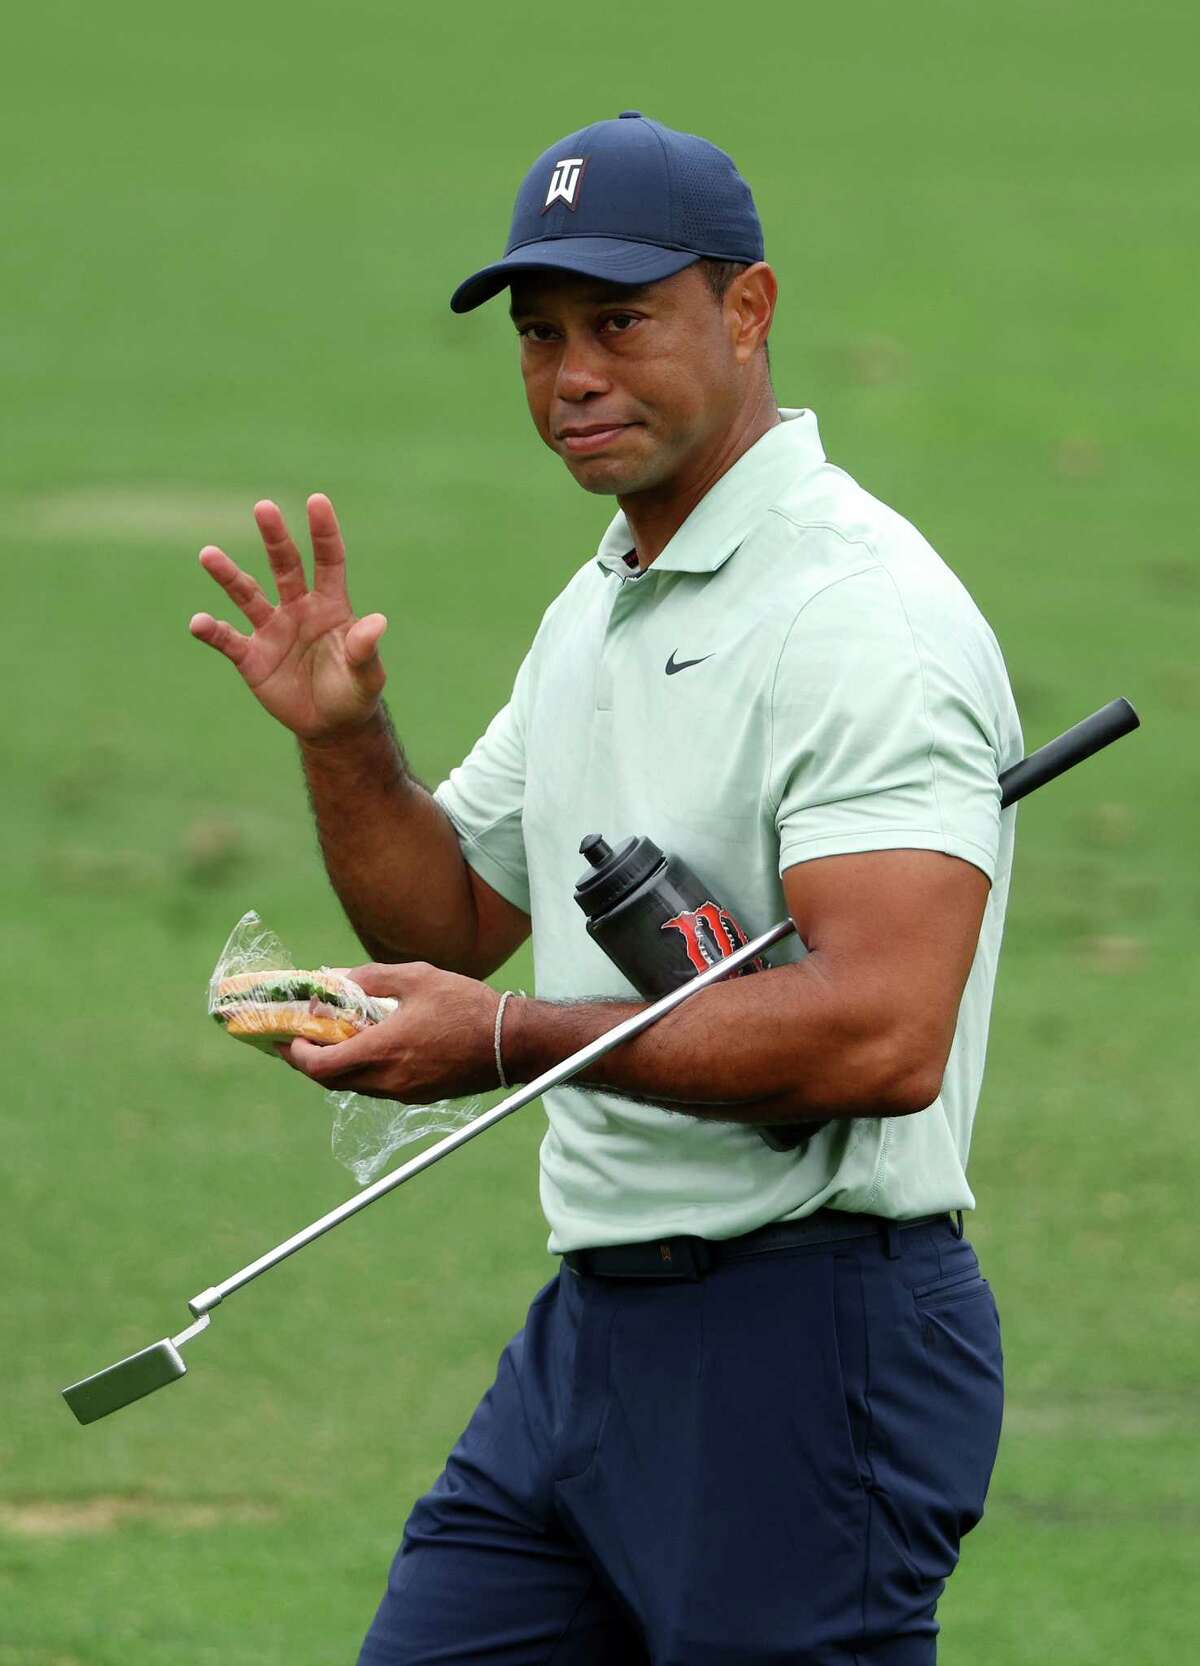 AUGUSTA, GEORGIA - APRIL 05: Tiger Woods of the United States warms up on the range during a practice round prior to the Masters at Augusta National Golf Club on April 05, 2022 in Augusta, Georgia.